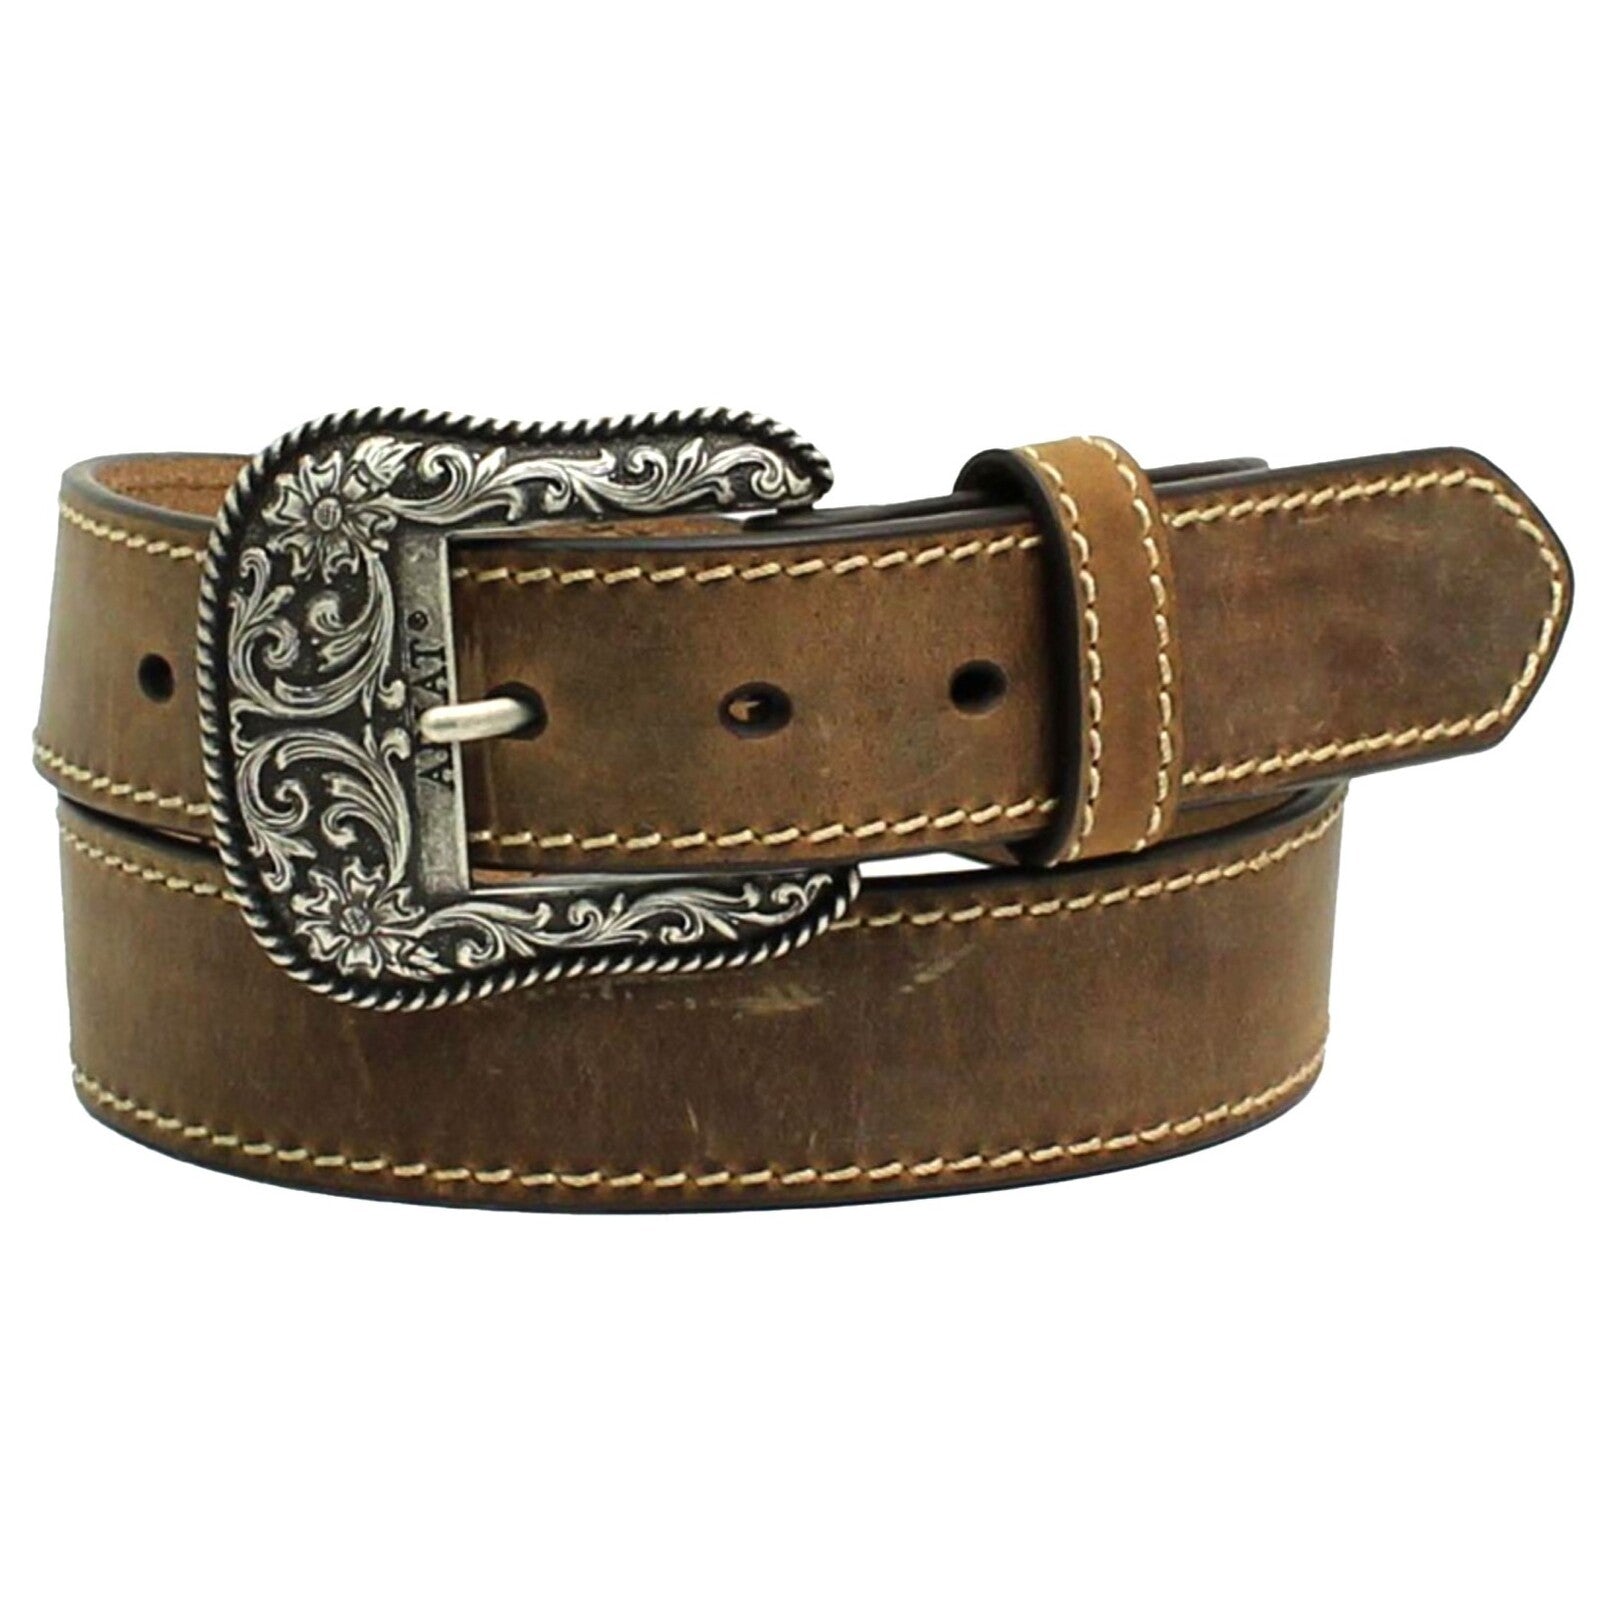 Ariat Wms Distressed Leather Belt 1.5in Brown